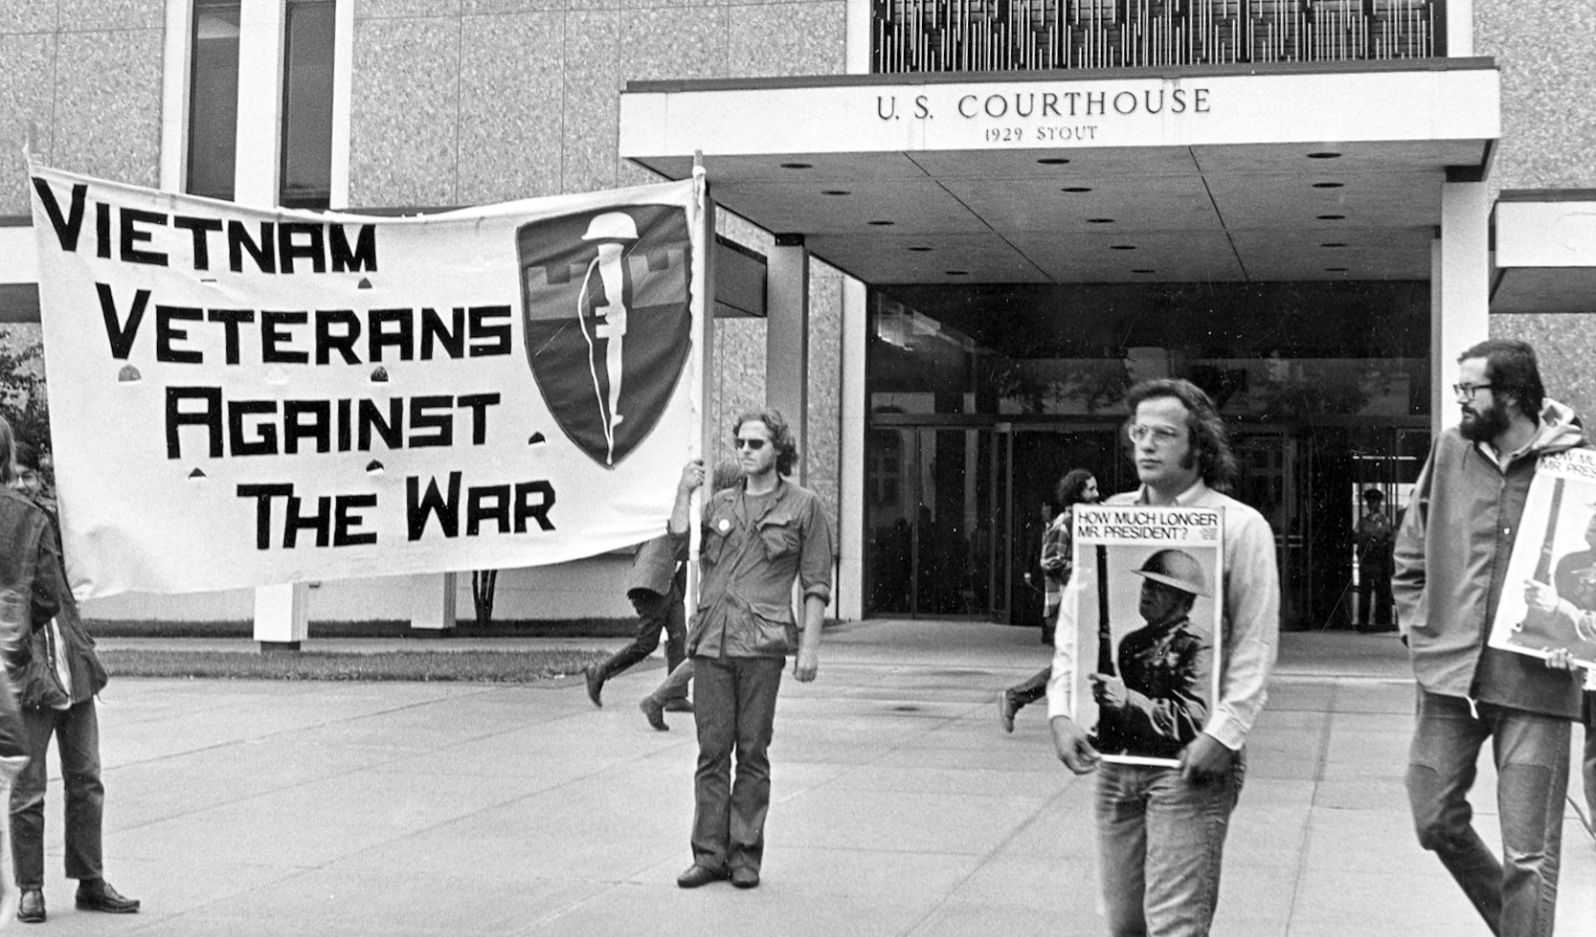 Vietnam Veterans Against the War protest in front of the Denver federal courthouse July 16, 1972